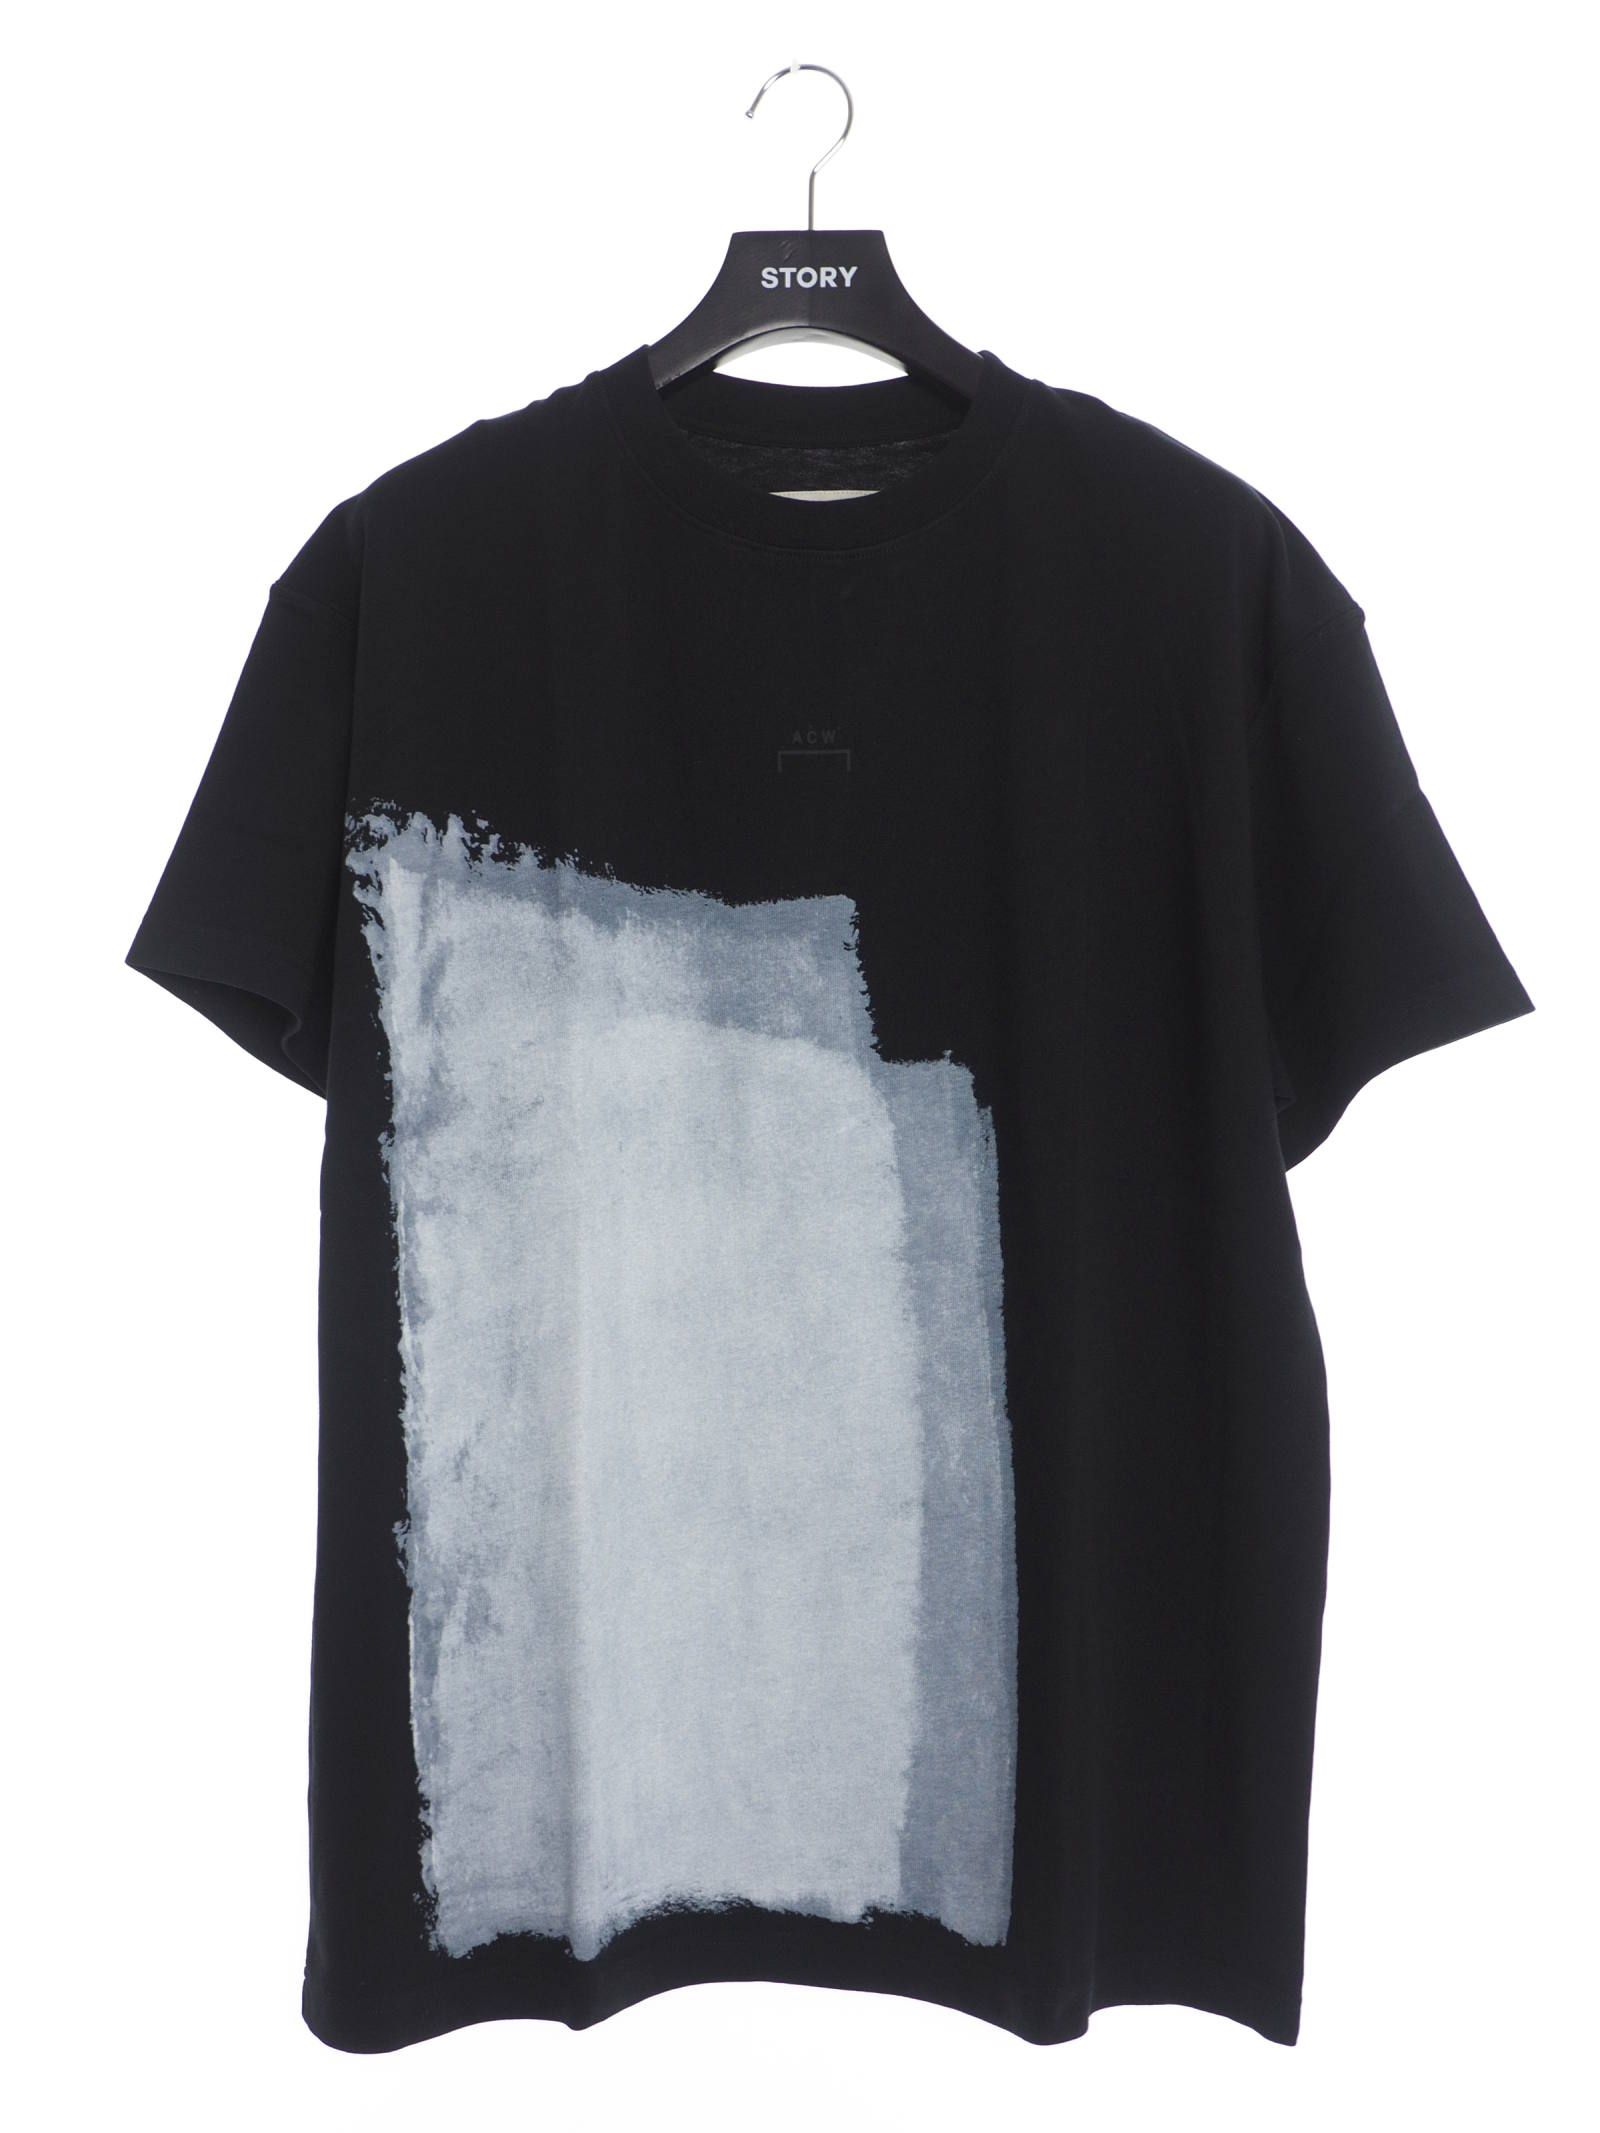 A-COLD-WALL 22SS GRAPHIC T-SHIRTナイキエアフォースワン